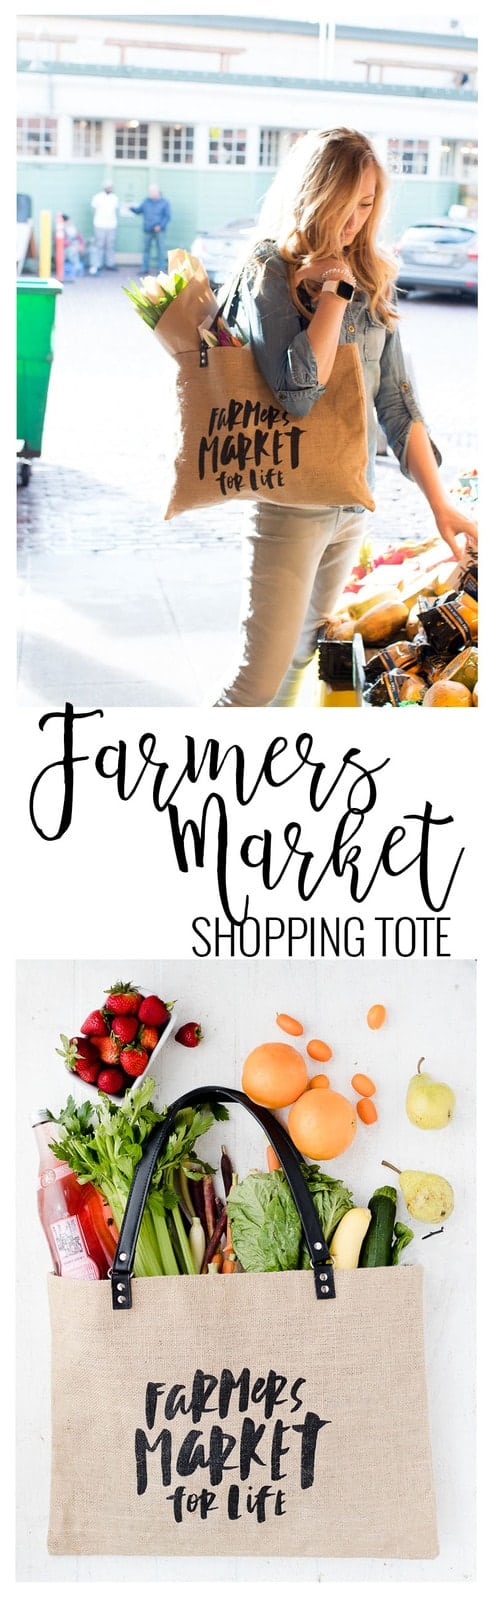 Jute Tote Shopping Bag | Farmers Market for Life Bag | jute totes and bags | high quality jute totes | stylish jute totes | stylish totes | totes for every occasion | stylish shopping bags || Oh So Delicioso